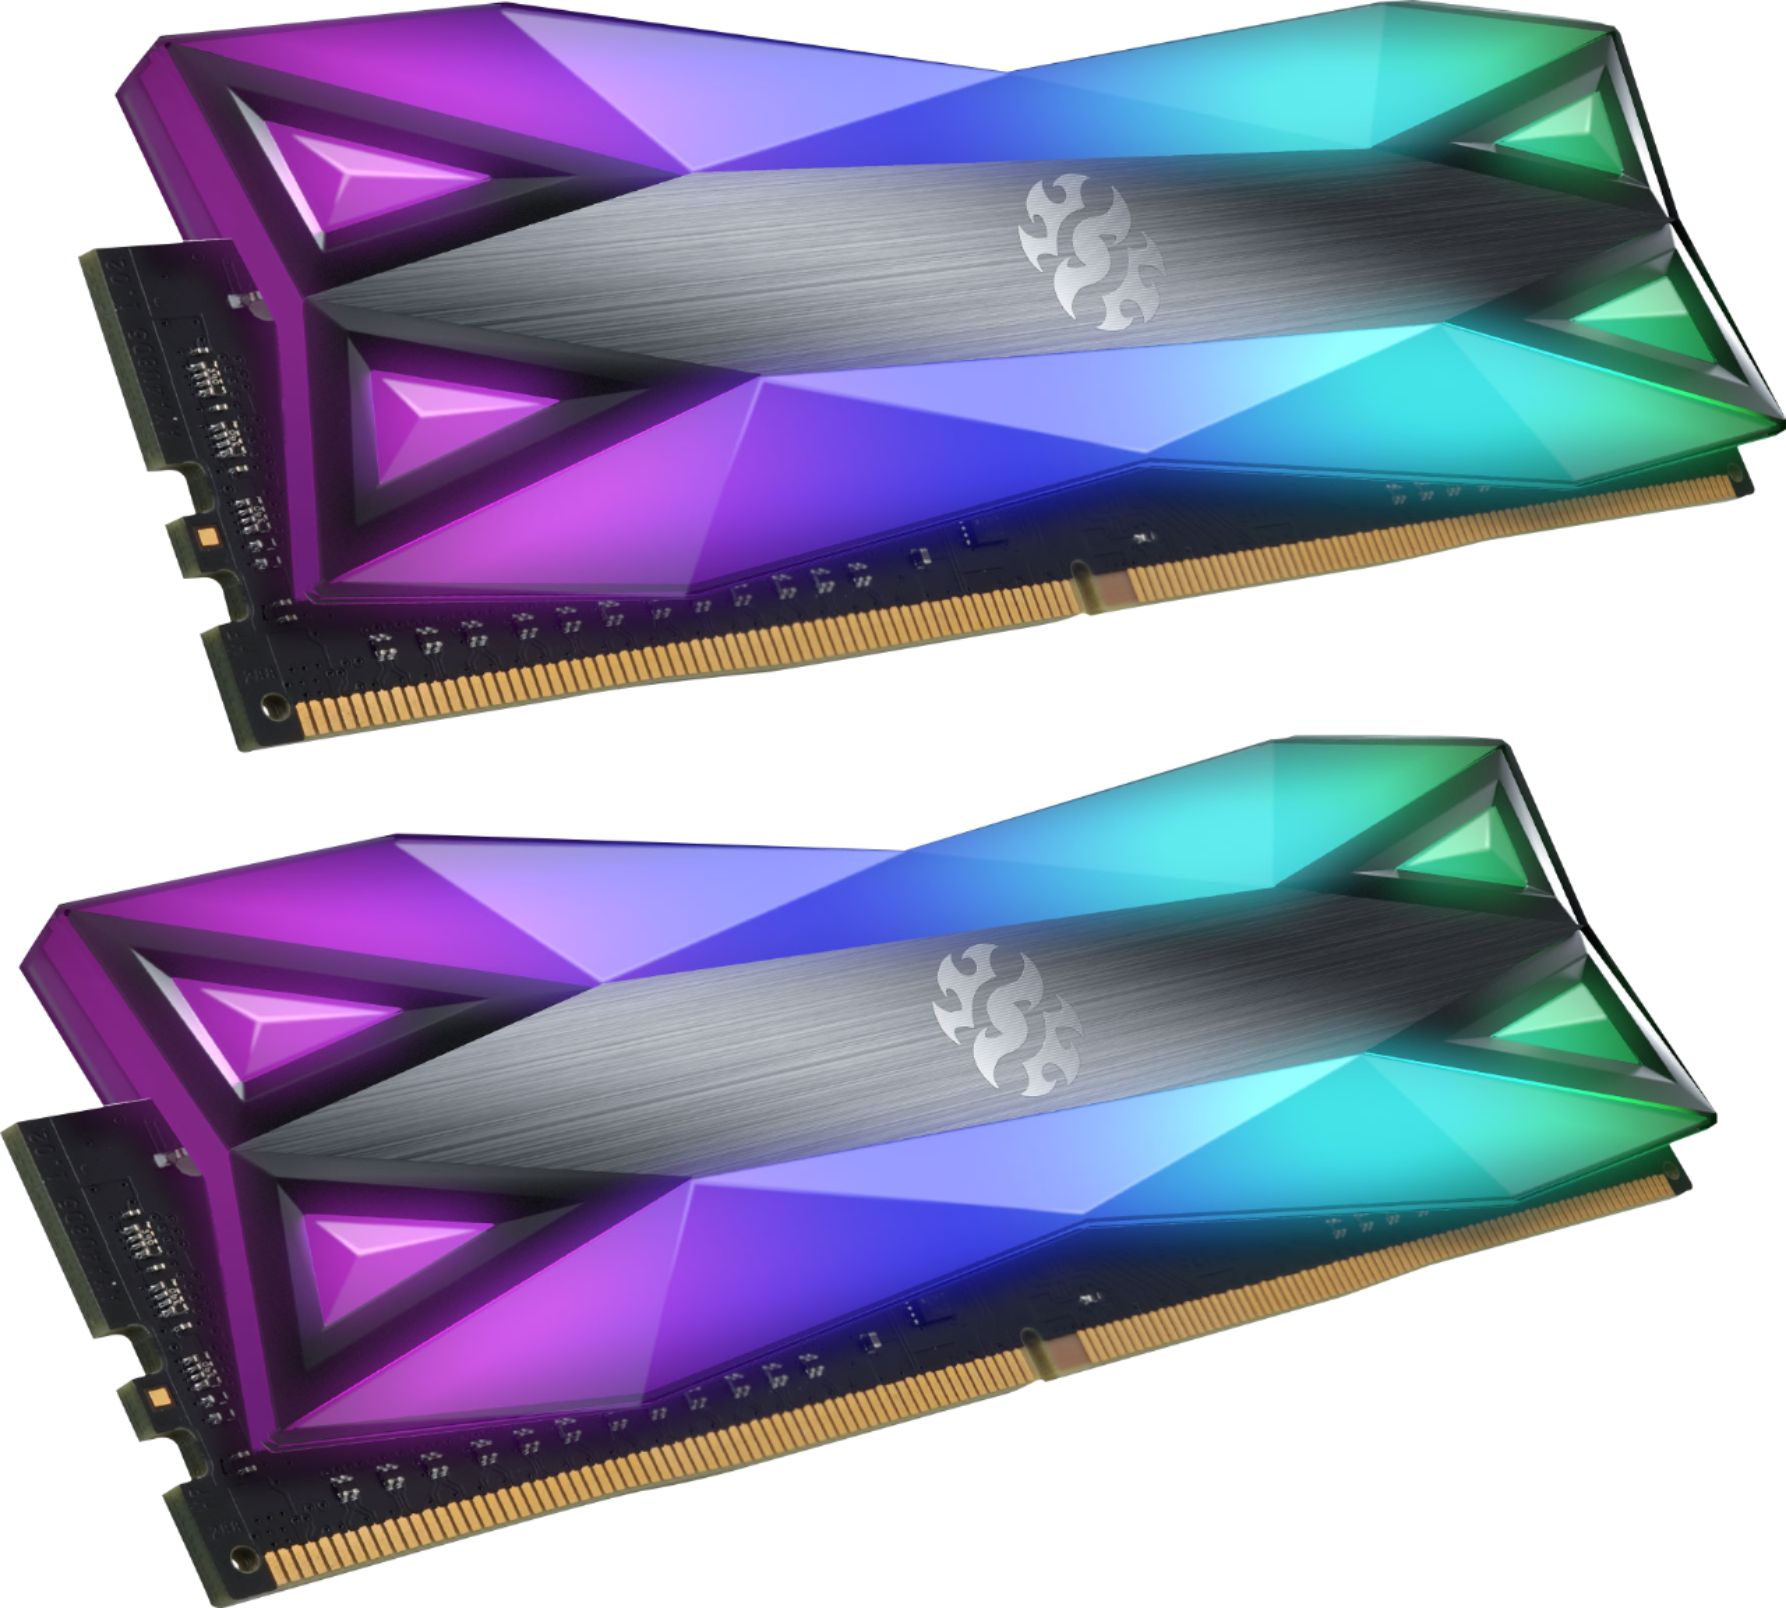 XPG DDR4 D60G RGB 16GB (2x8GB) 3200MHz CL16 PC4-25600 U-DIMM Desktop Memory  (AX4U320038G16A-DT60), Gray,  price tracker / tracking,  price  history charts,  price watches,  price drop alerts